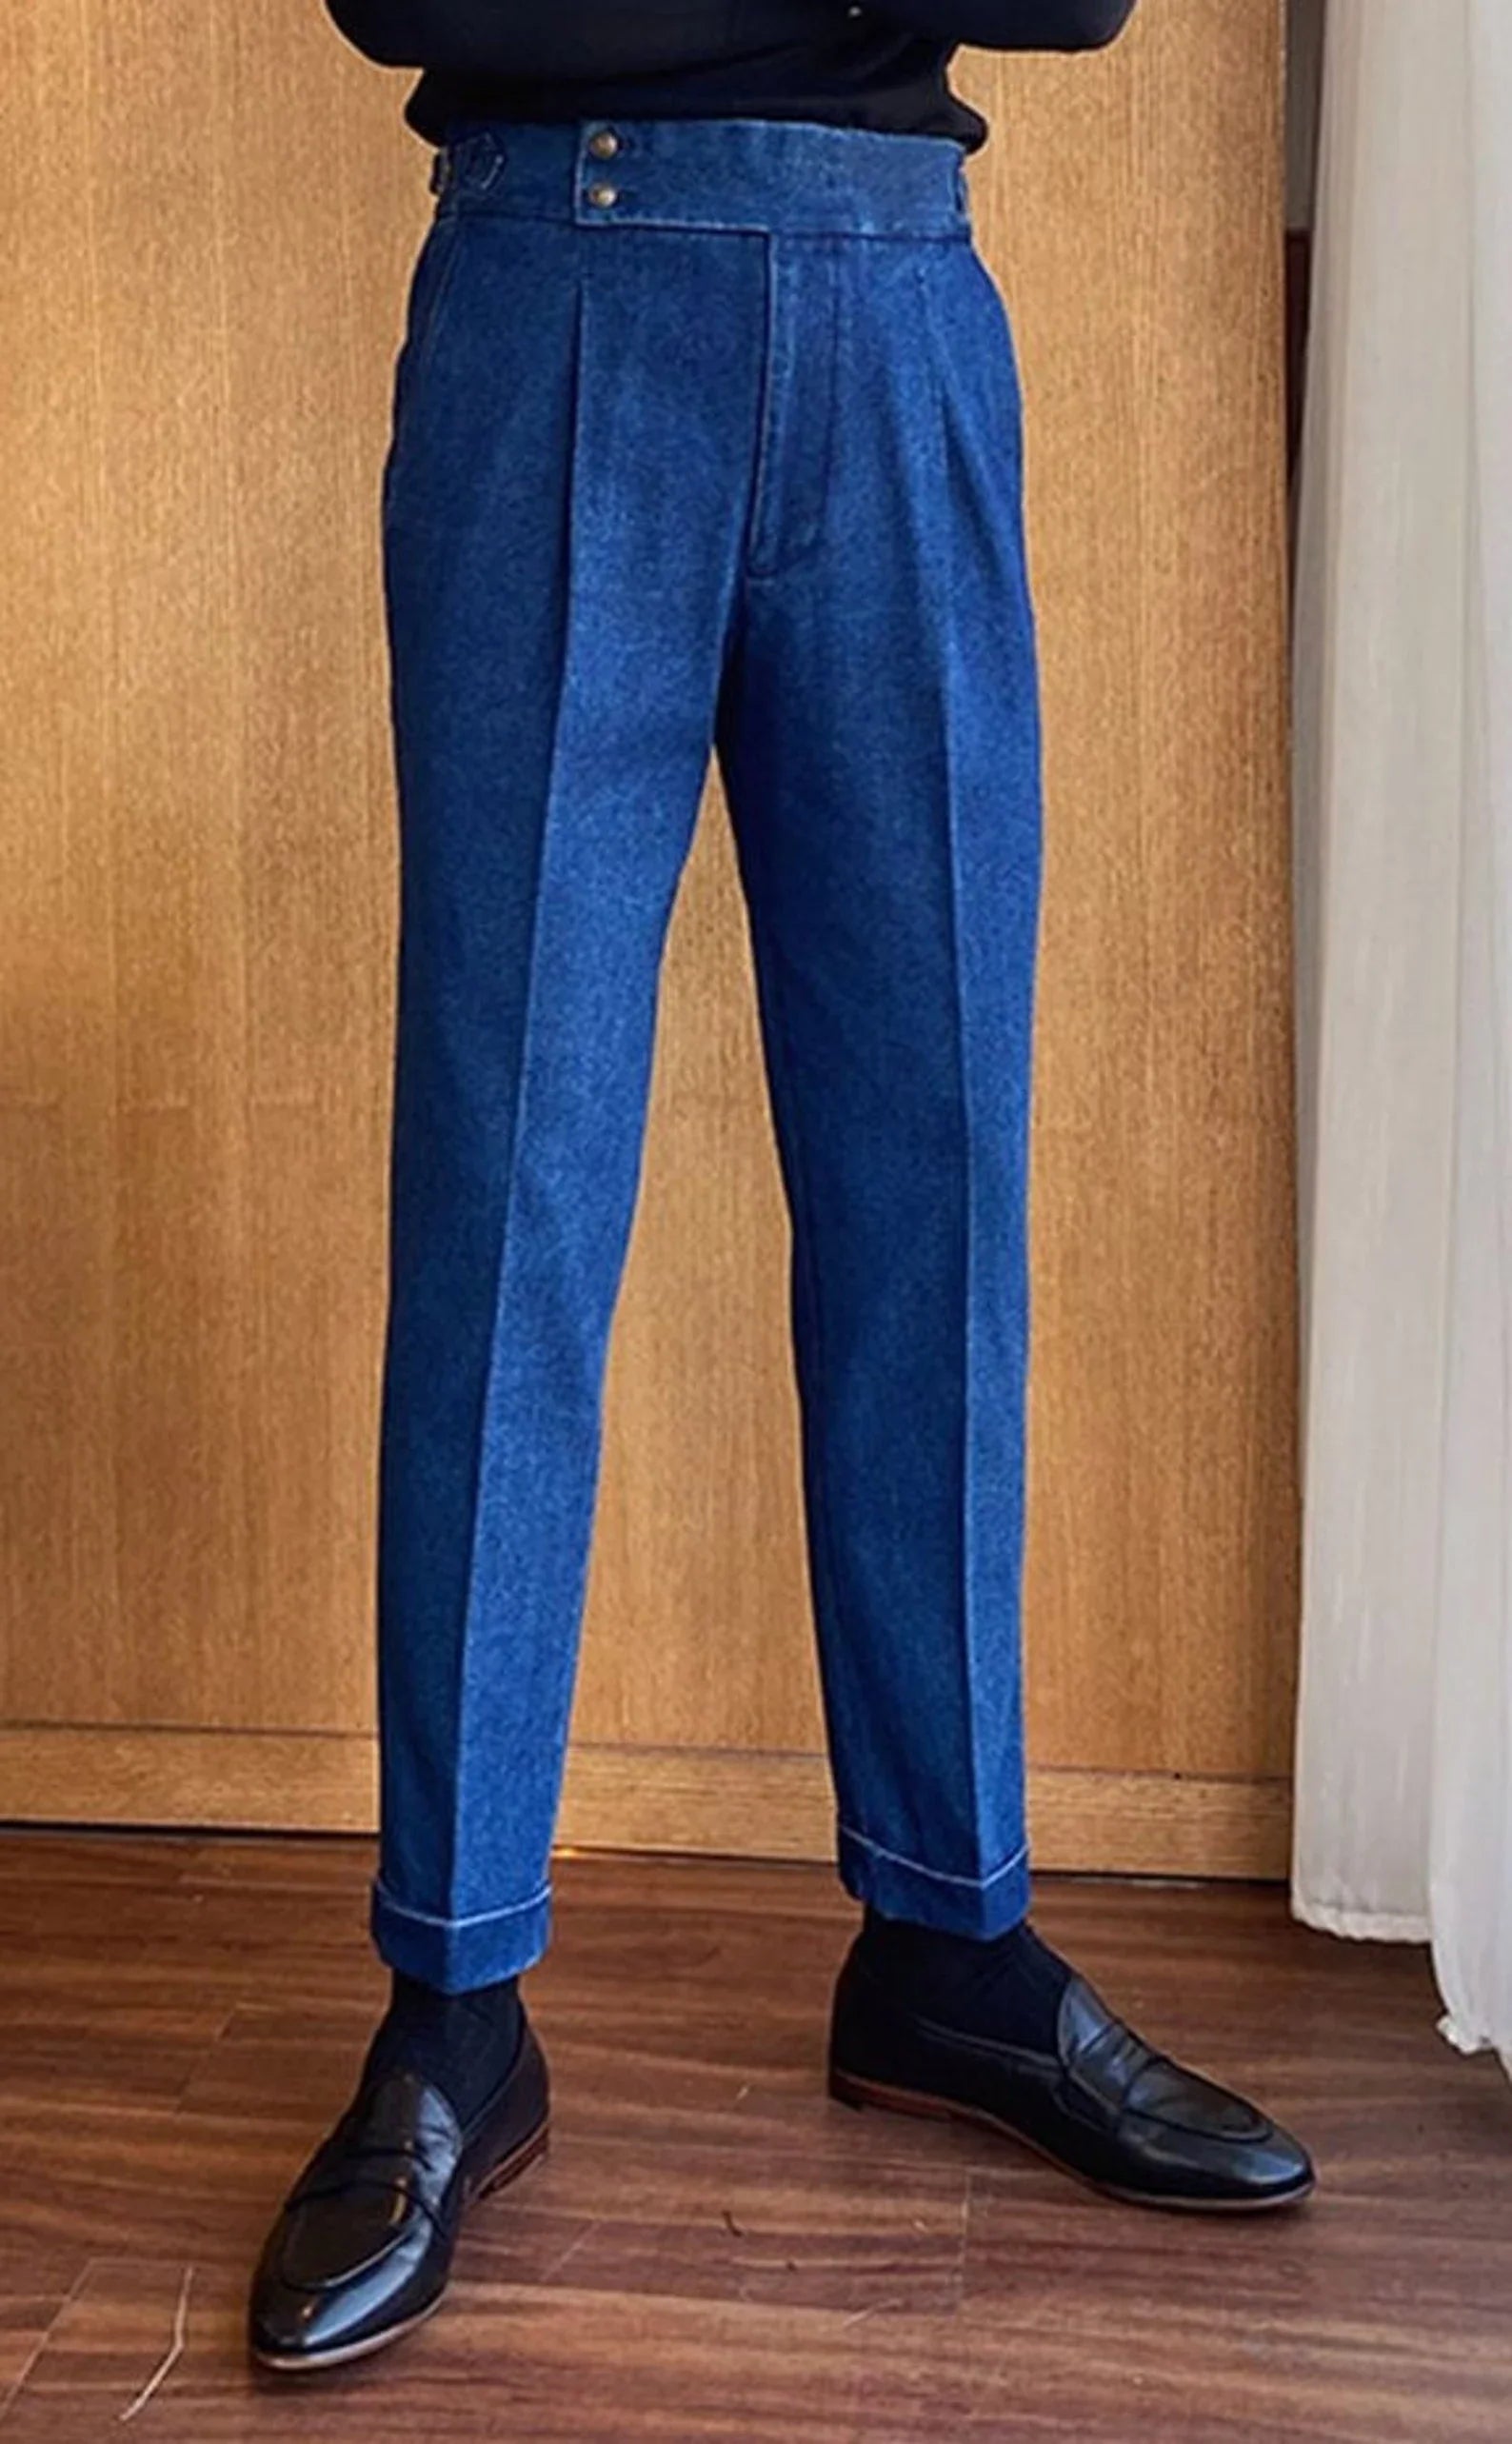 Formal Work Style Trouser